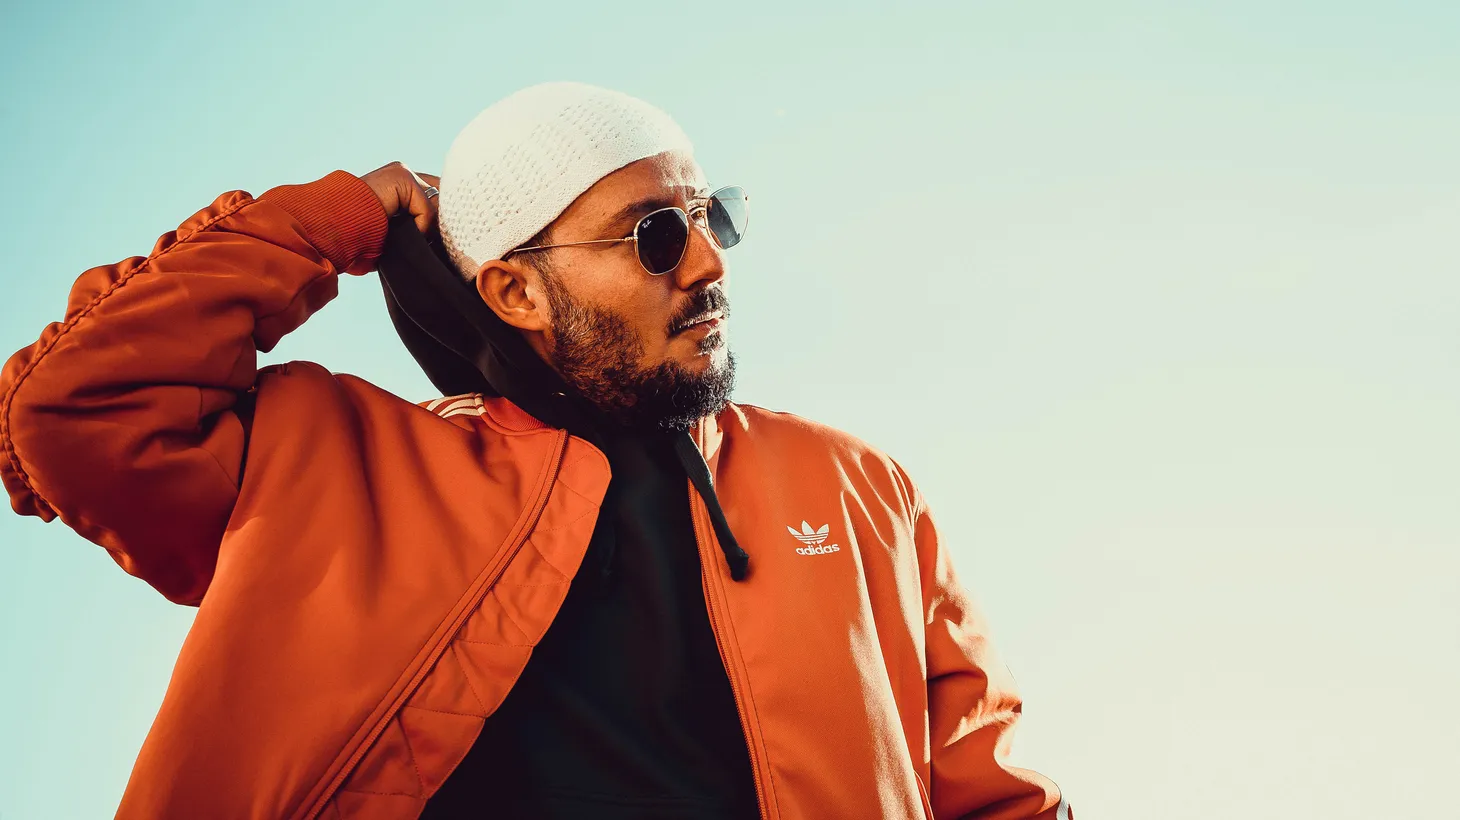 The revolution continues on the dance floor for neo-funk producer and multi-instrumentalist Farees. Having worked with artists like Calexico and Leo Nocentelli of The Meters, the Tuareg artist lives to create sonic art.